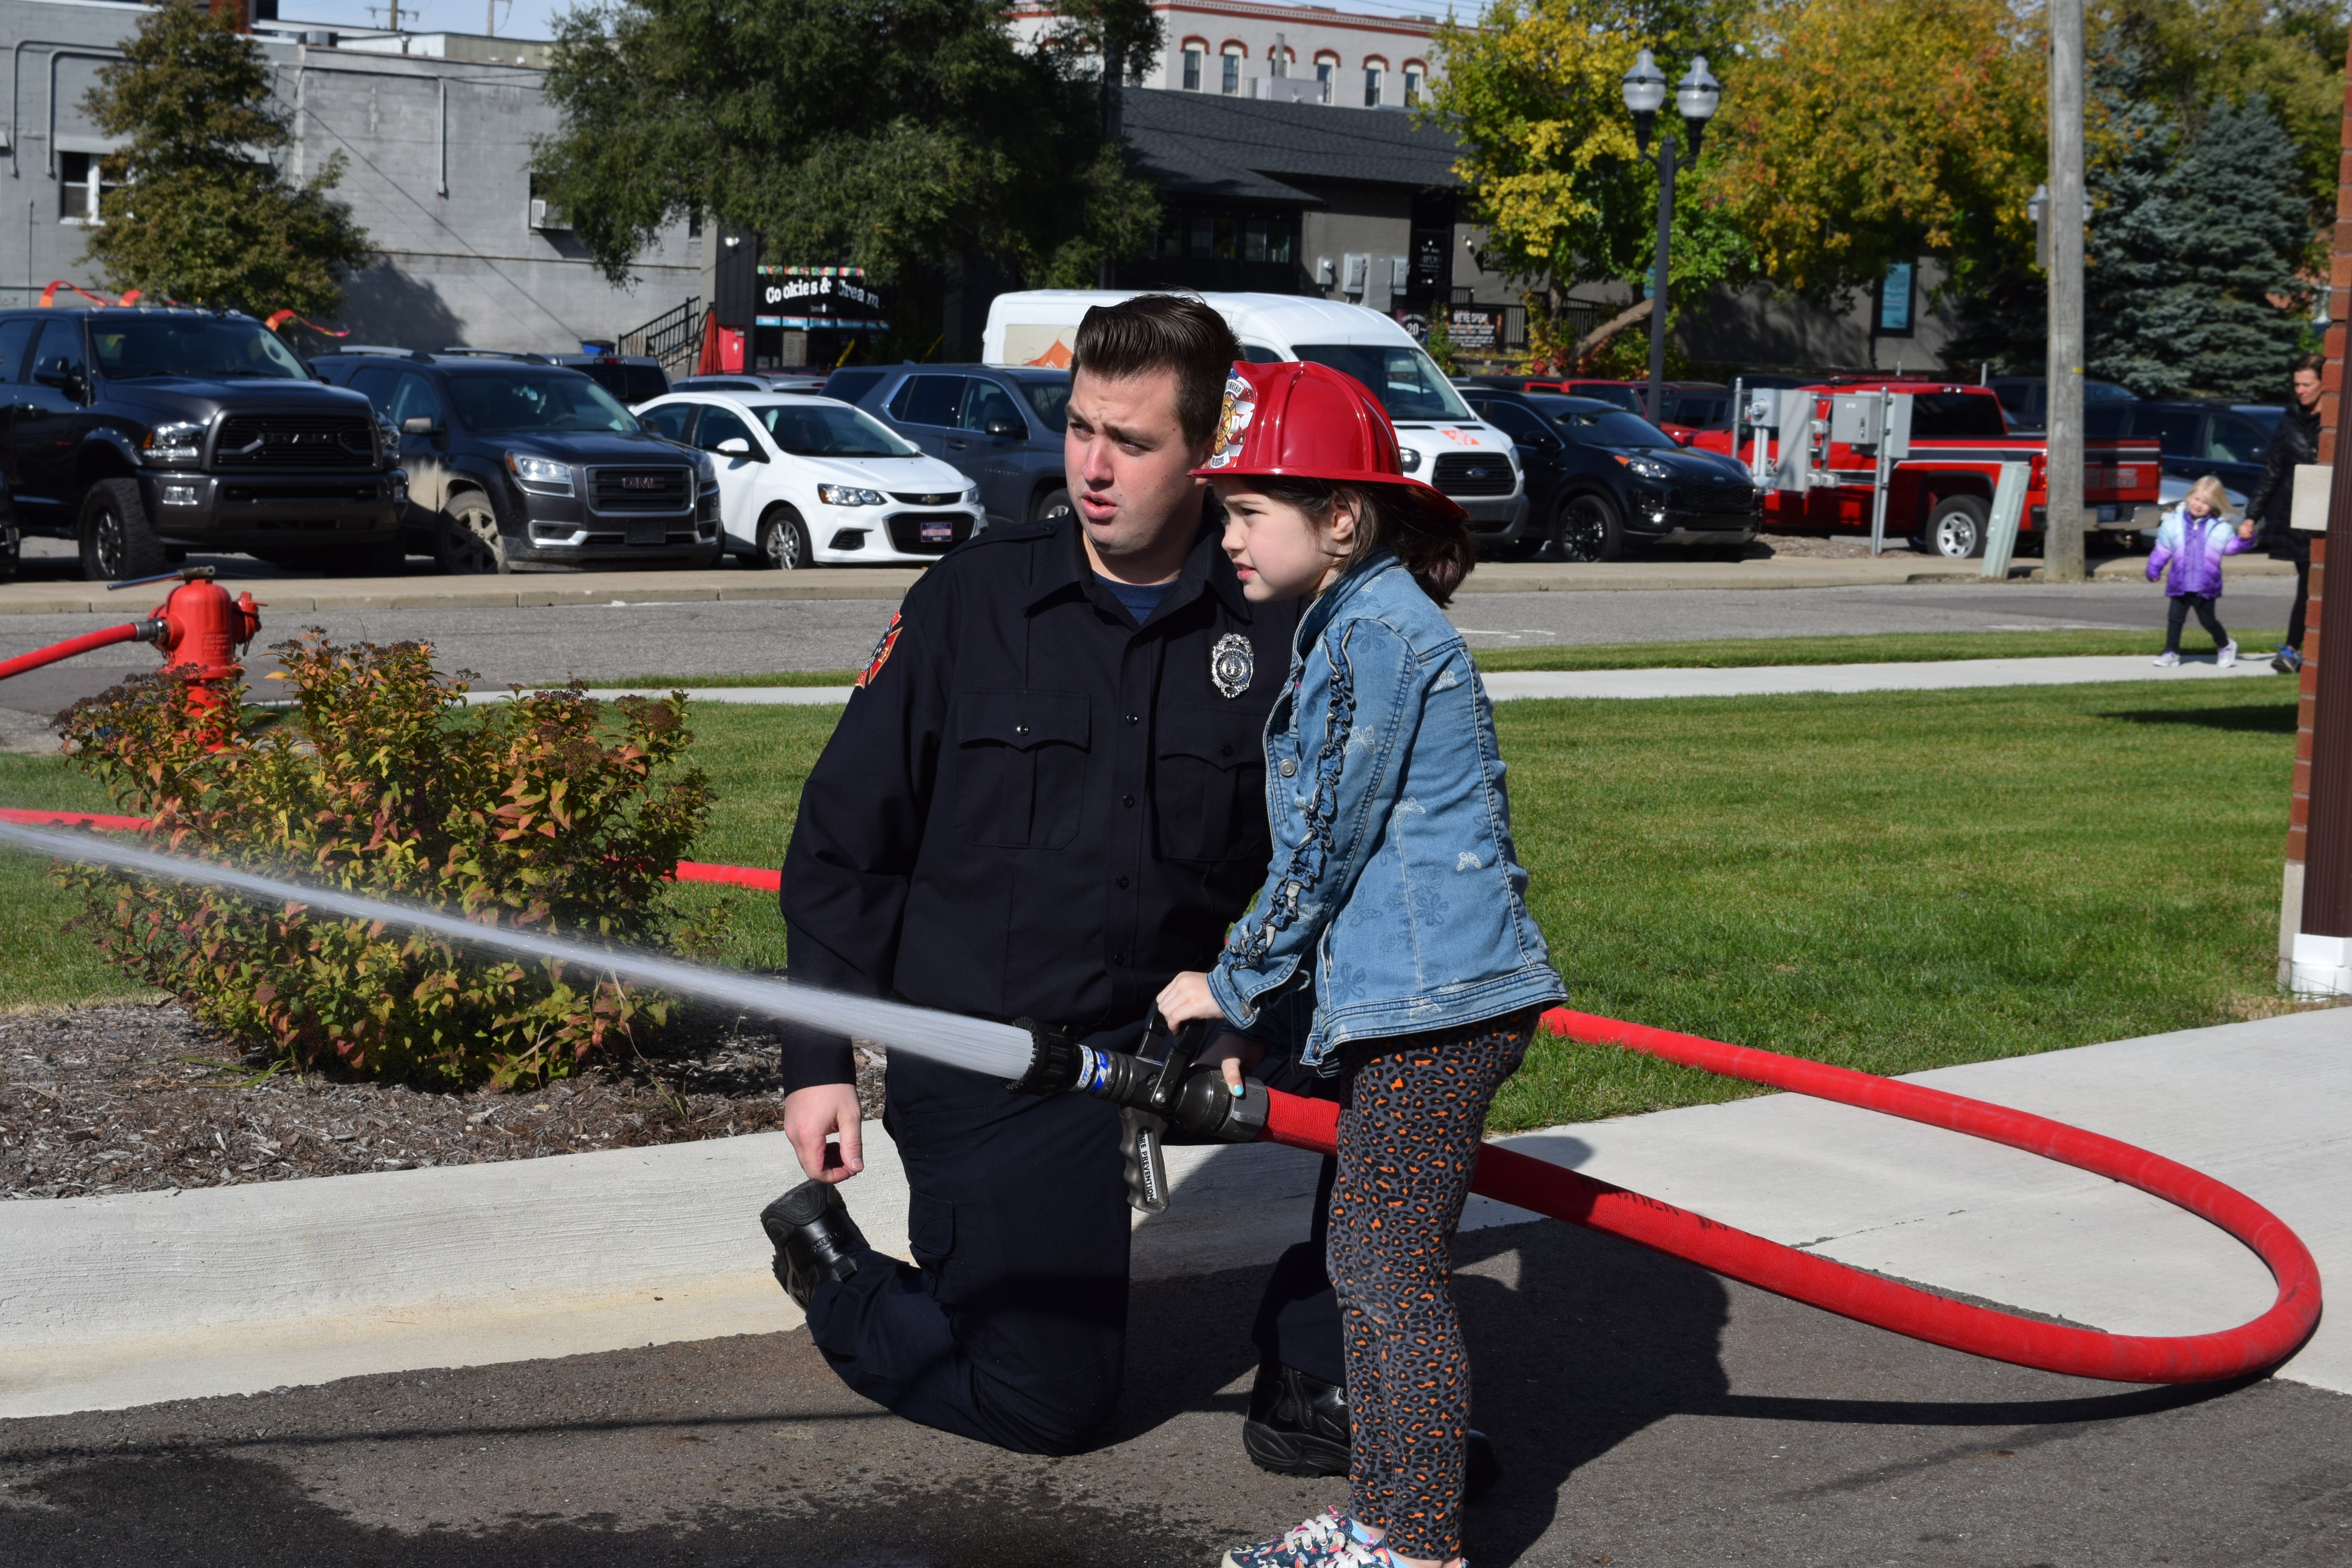 Orion Twp. Fire Dept. activities, open house wrap-up fire prevention week